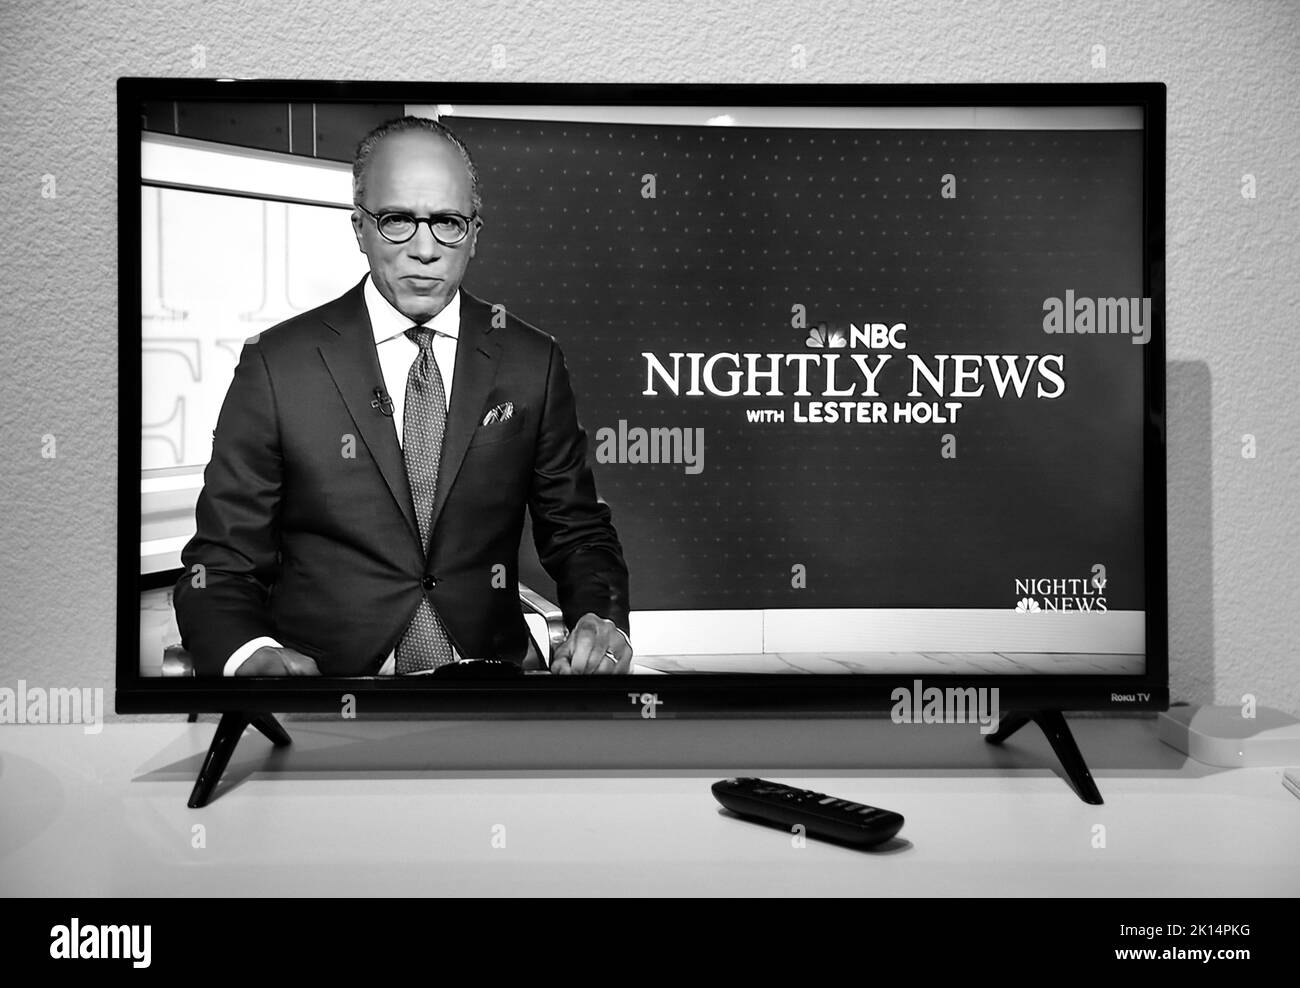 A television screenshot of news anchor Lester Holt anchorman for the NBC Nightly News. Stock Photo